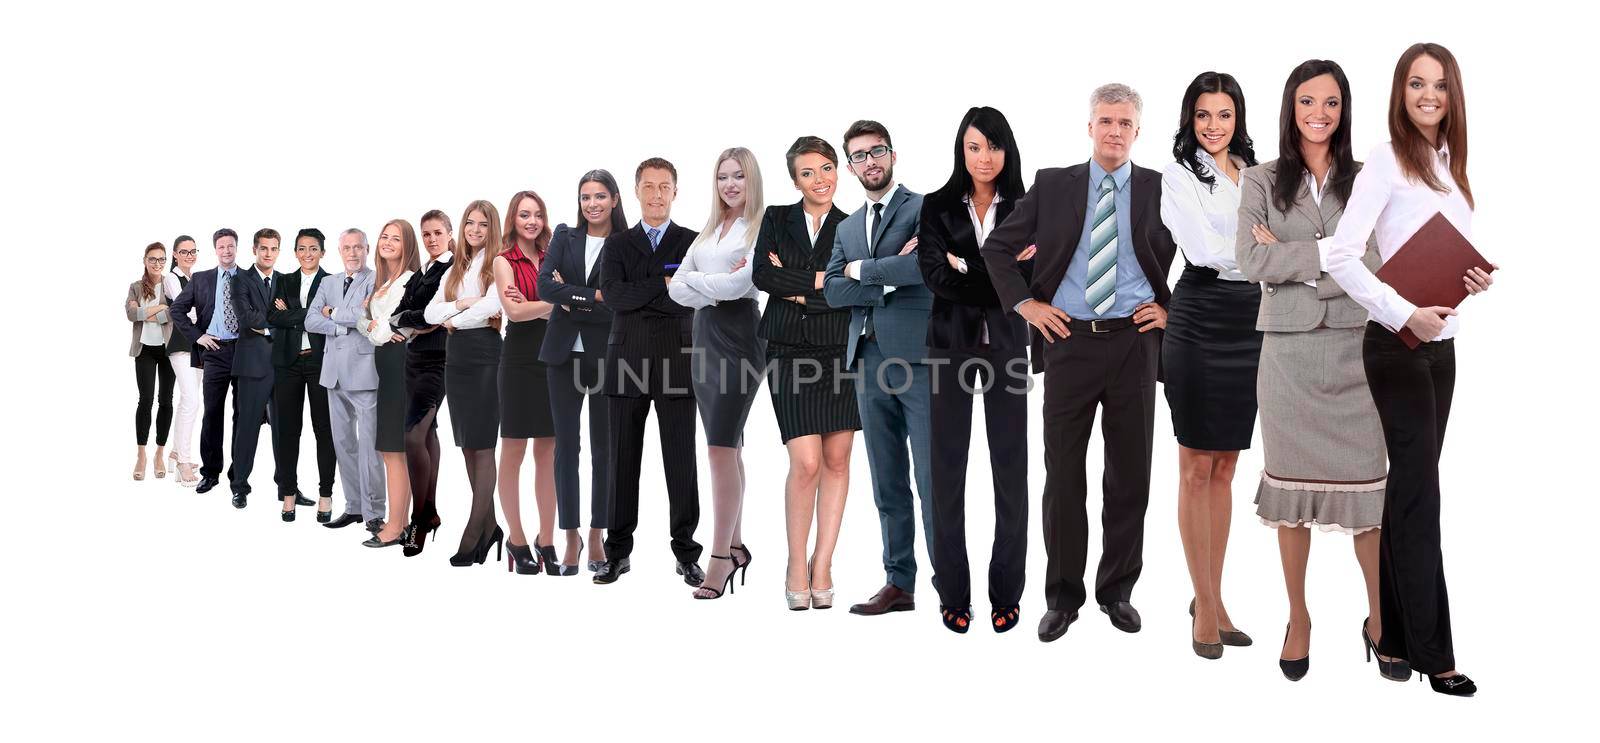 Template with a crowd of business people by asdf